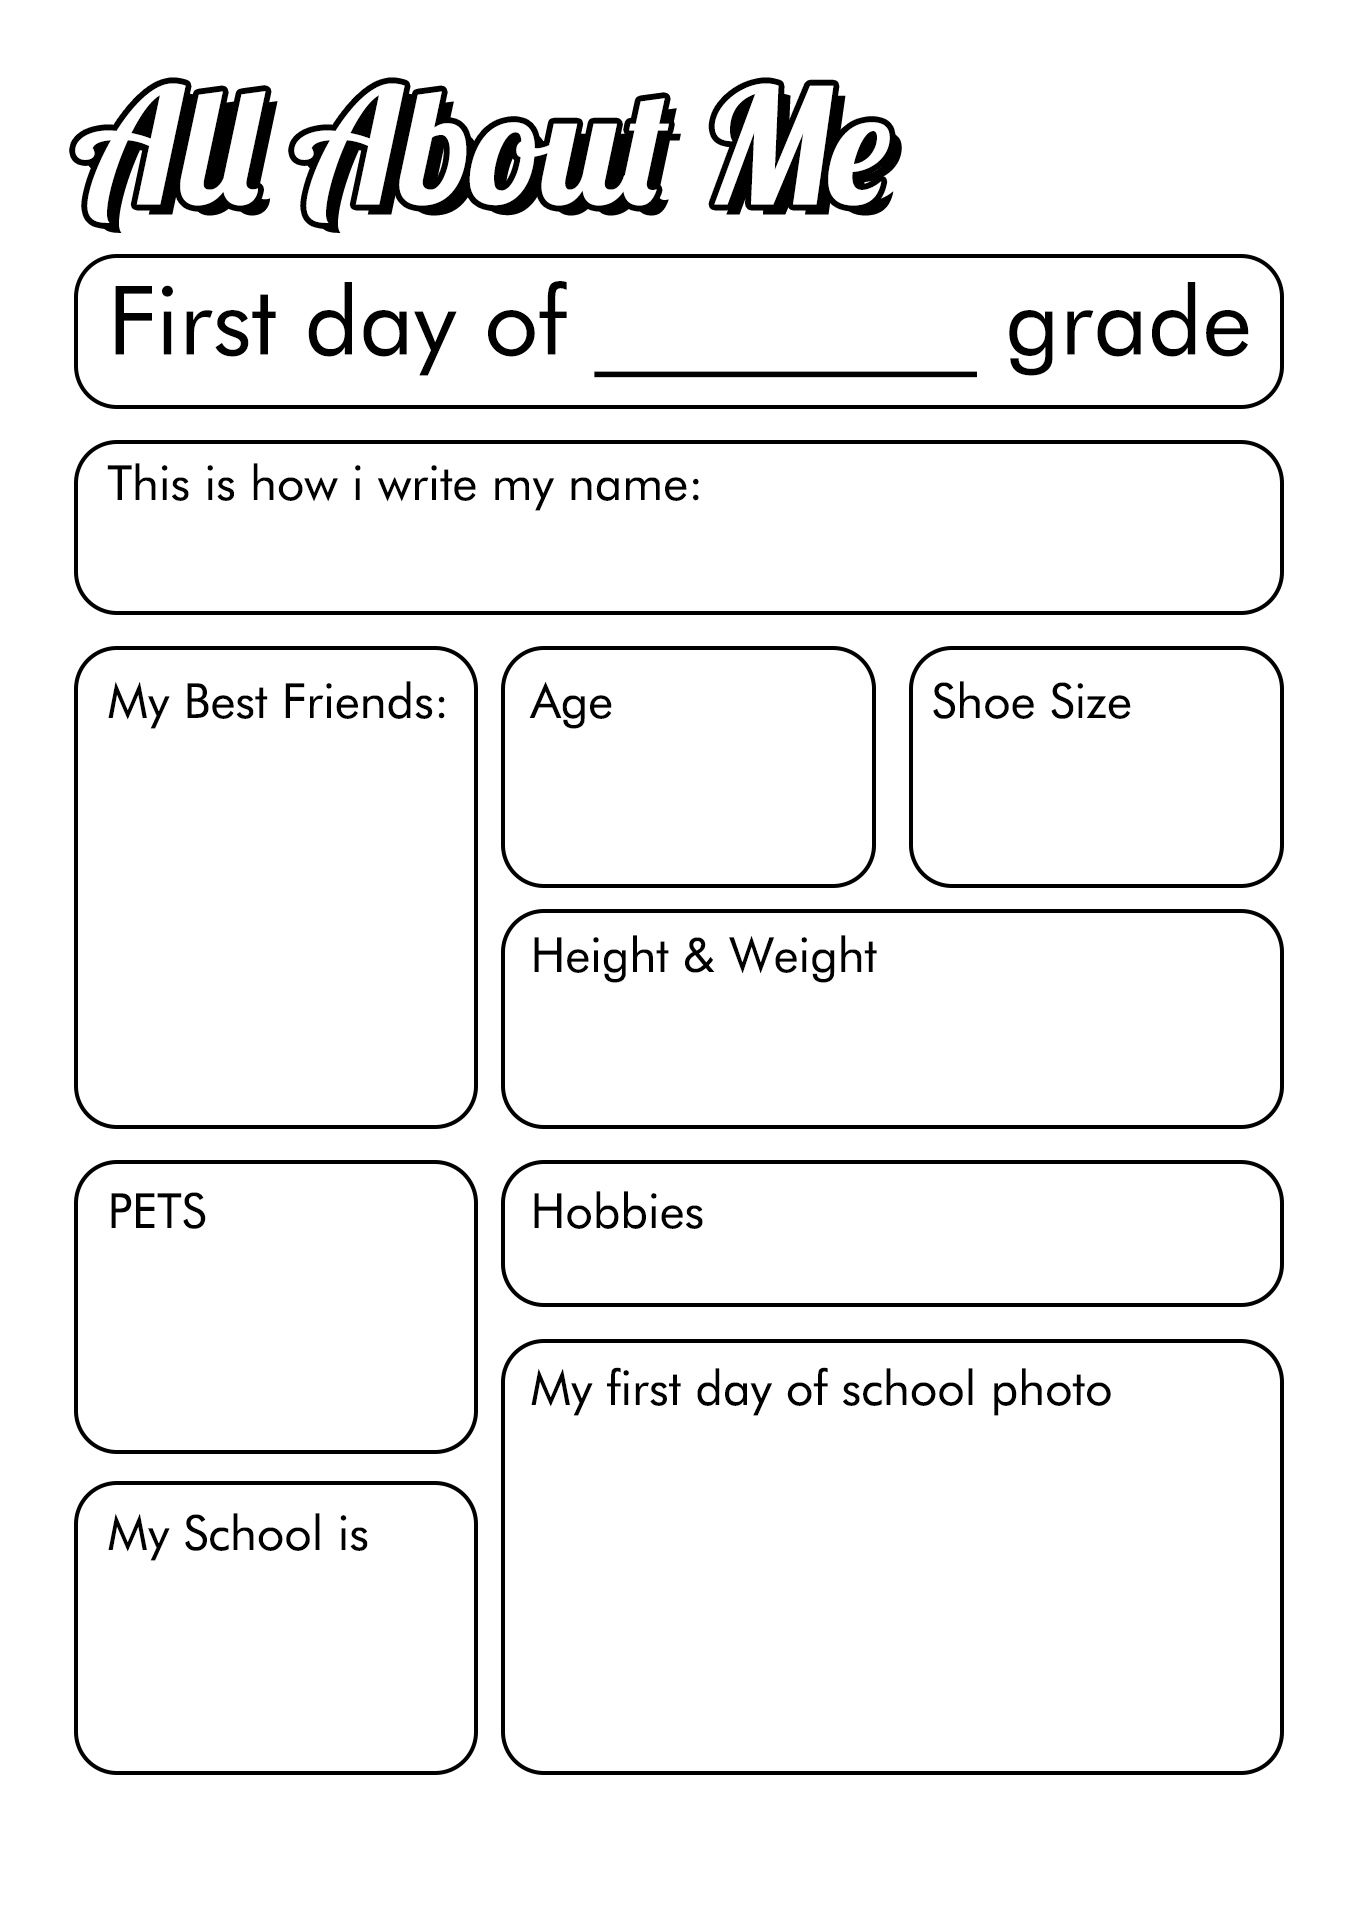 All About Me Worksheets First Day of School Image